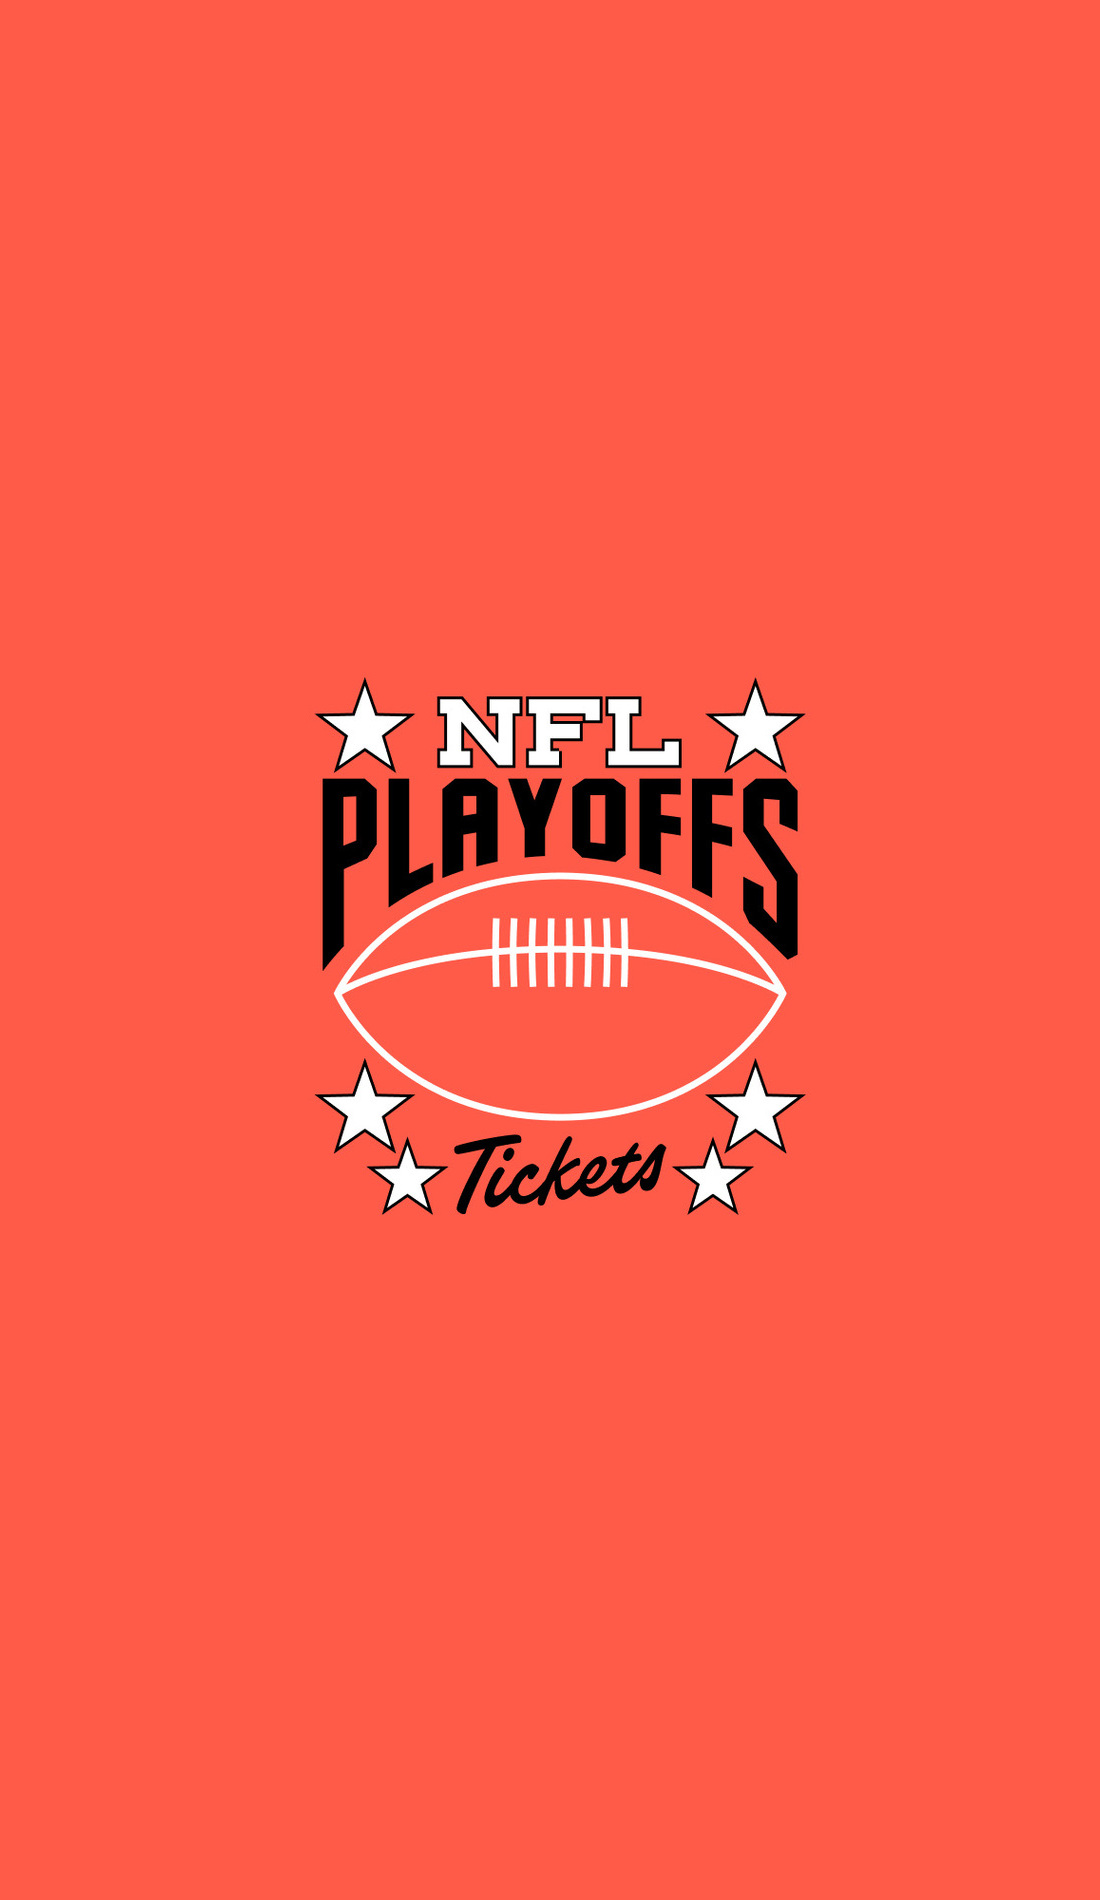 A NFC Divisional Round live event